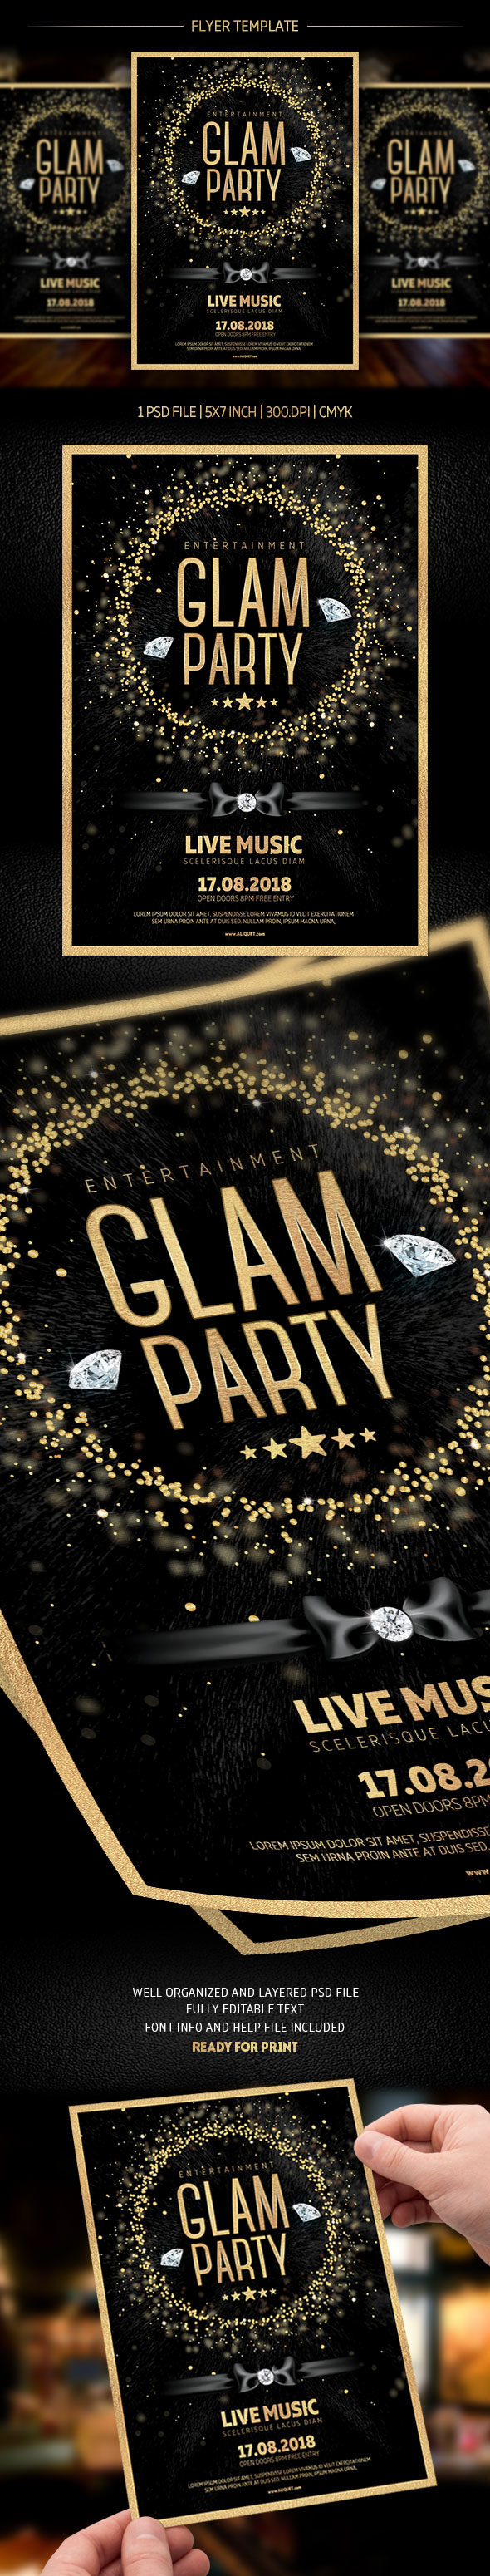 flyer template disco elegant Event exclusive feather glam party glamorous glamour